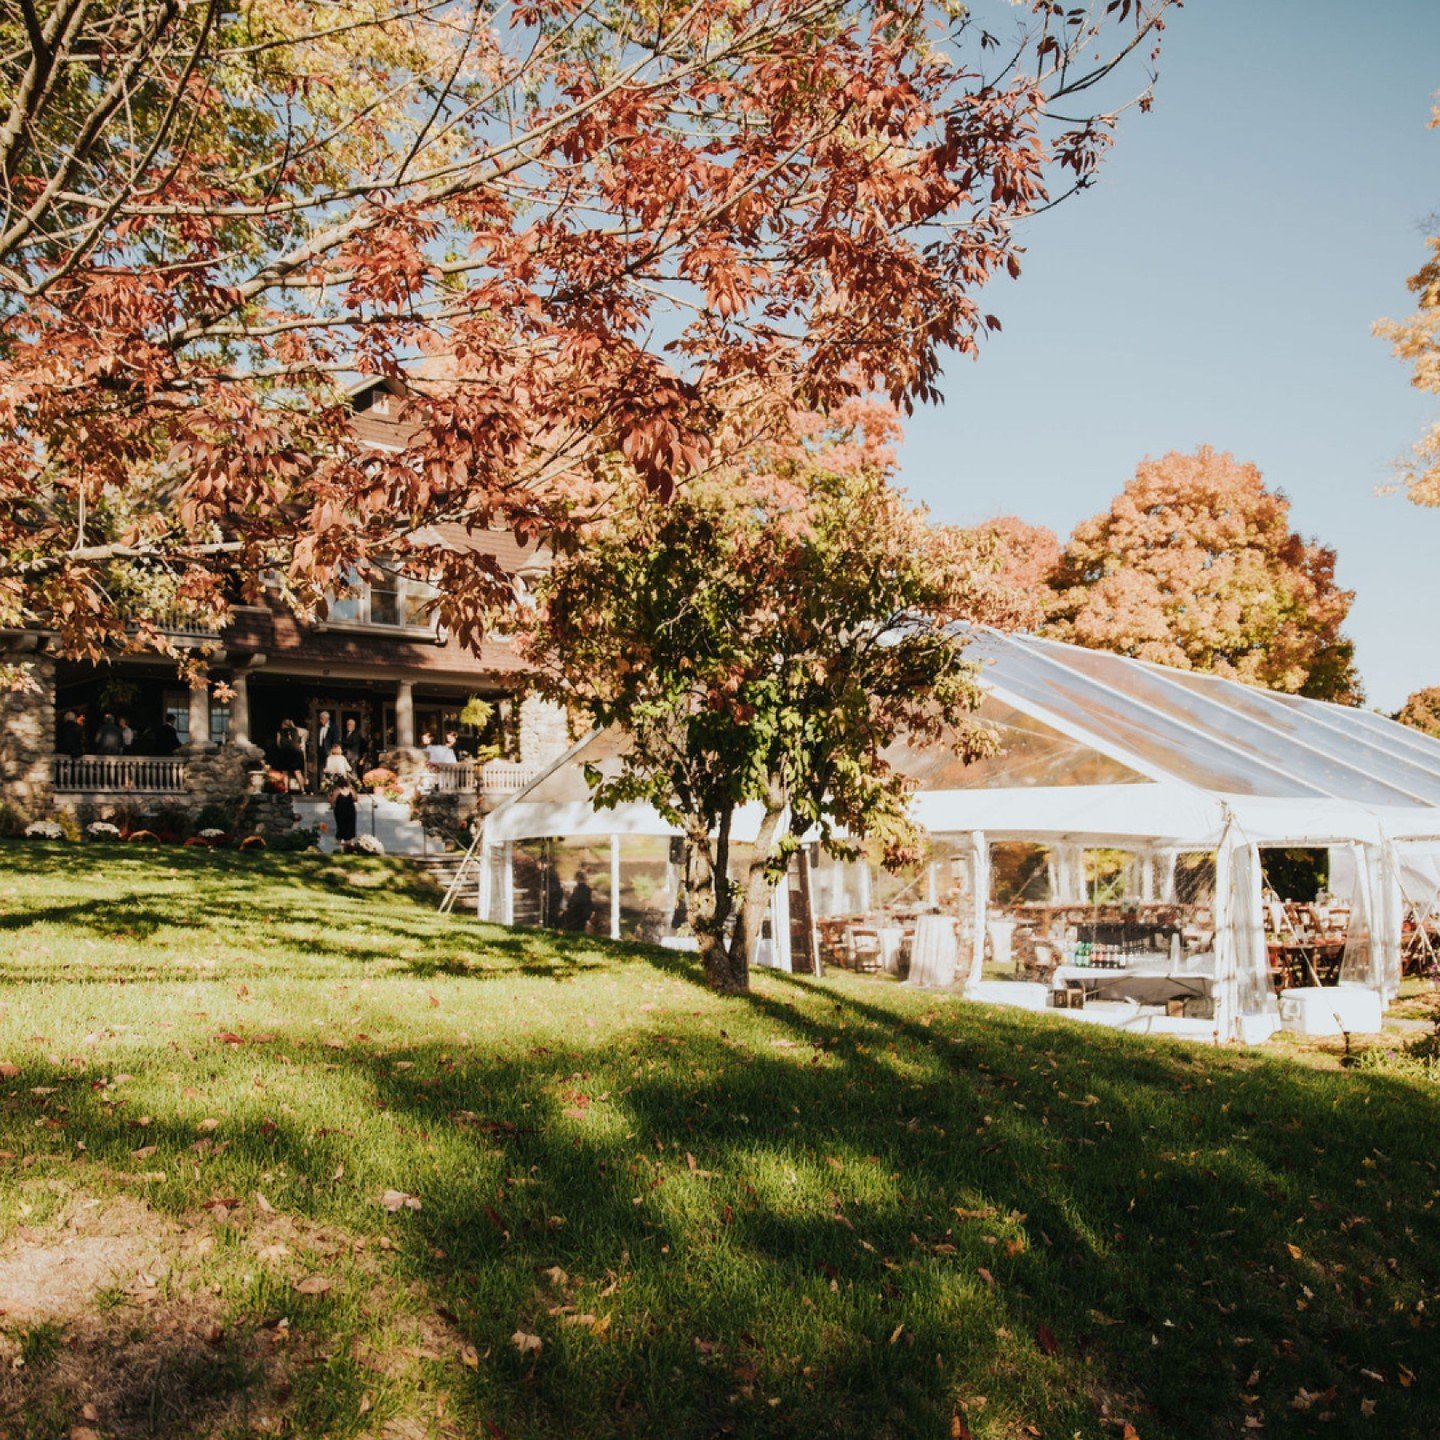 Creating unforgettable moments where love and nature meet. 

When we started planning M &amp; E's fall wedding, M's one non-negotiable was a clear top tent so that the outside could seamlessly blend with the inside. 

As the leaves gently fell around